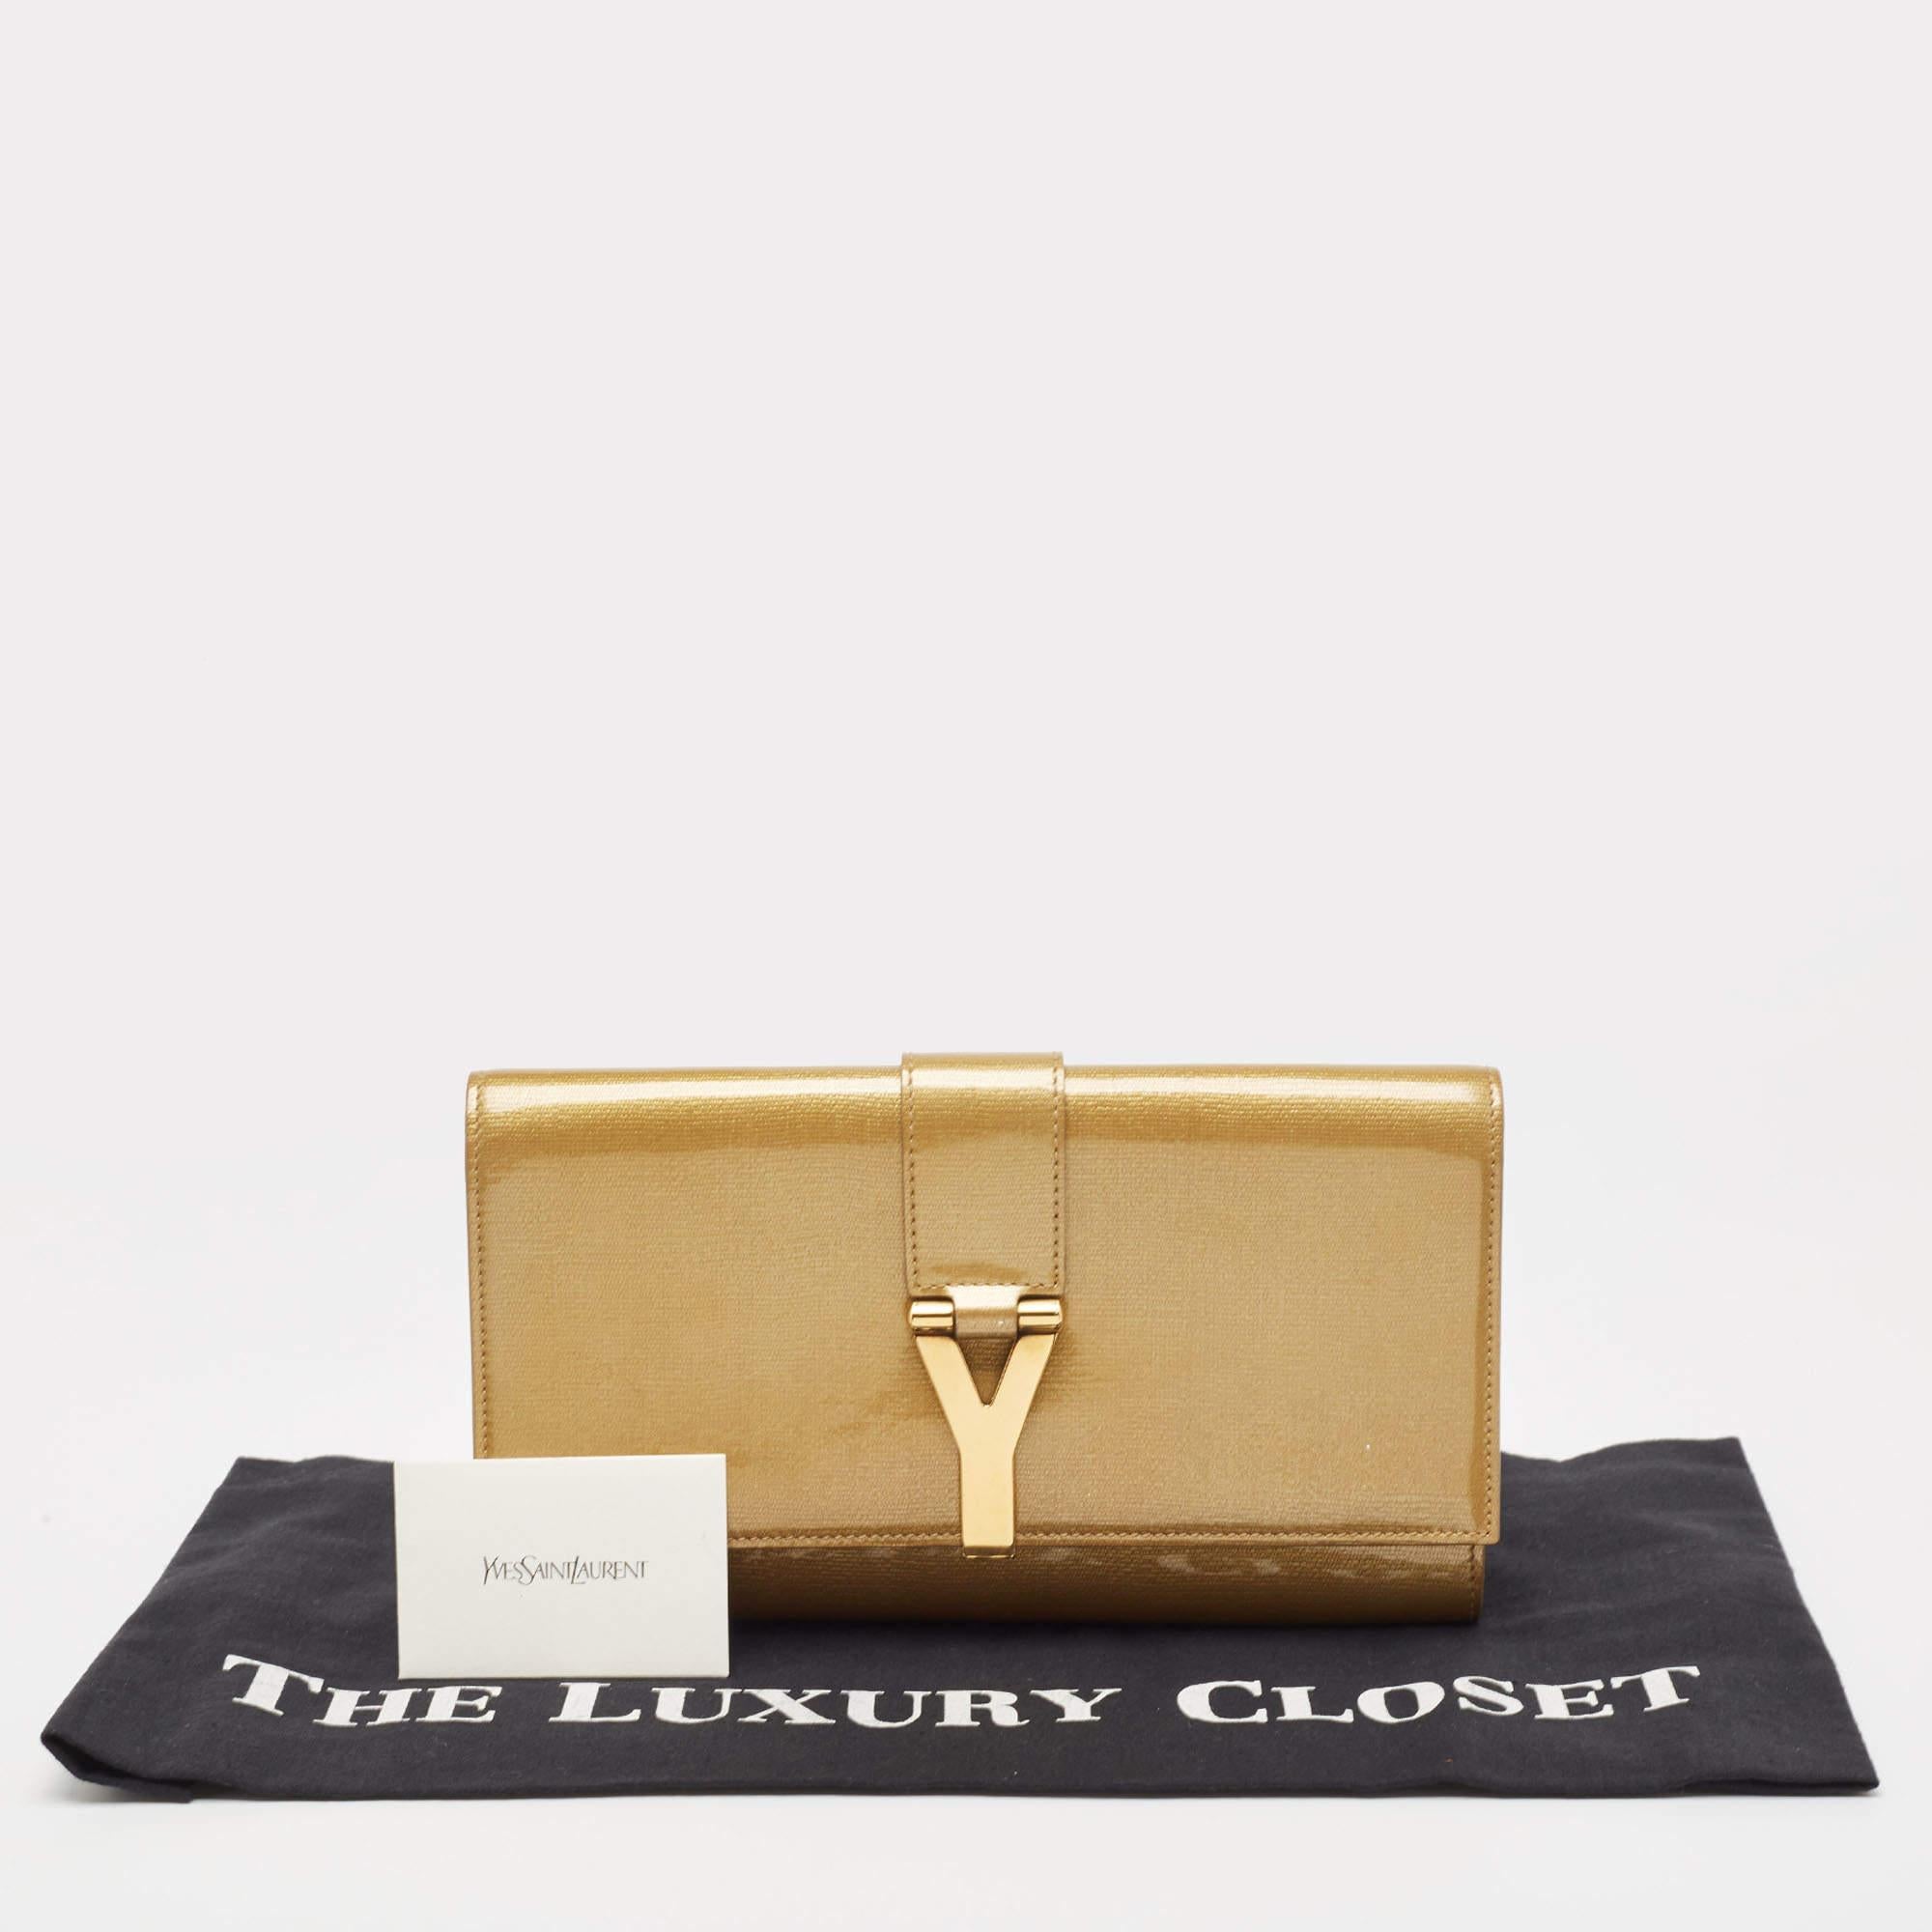 Yves Saint Laurent Gold Leather Large Chyc Clutch 7